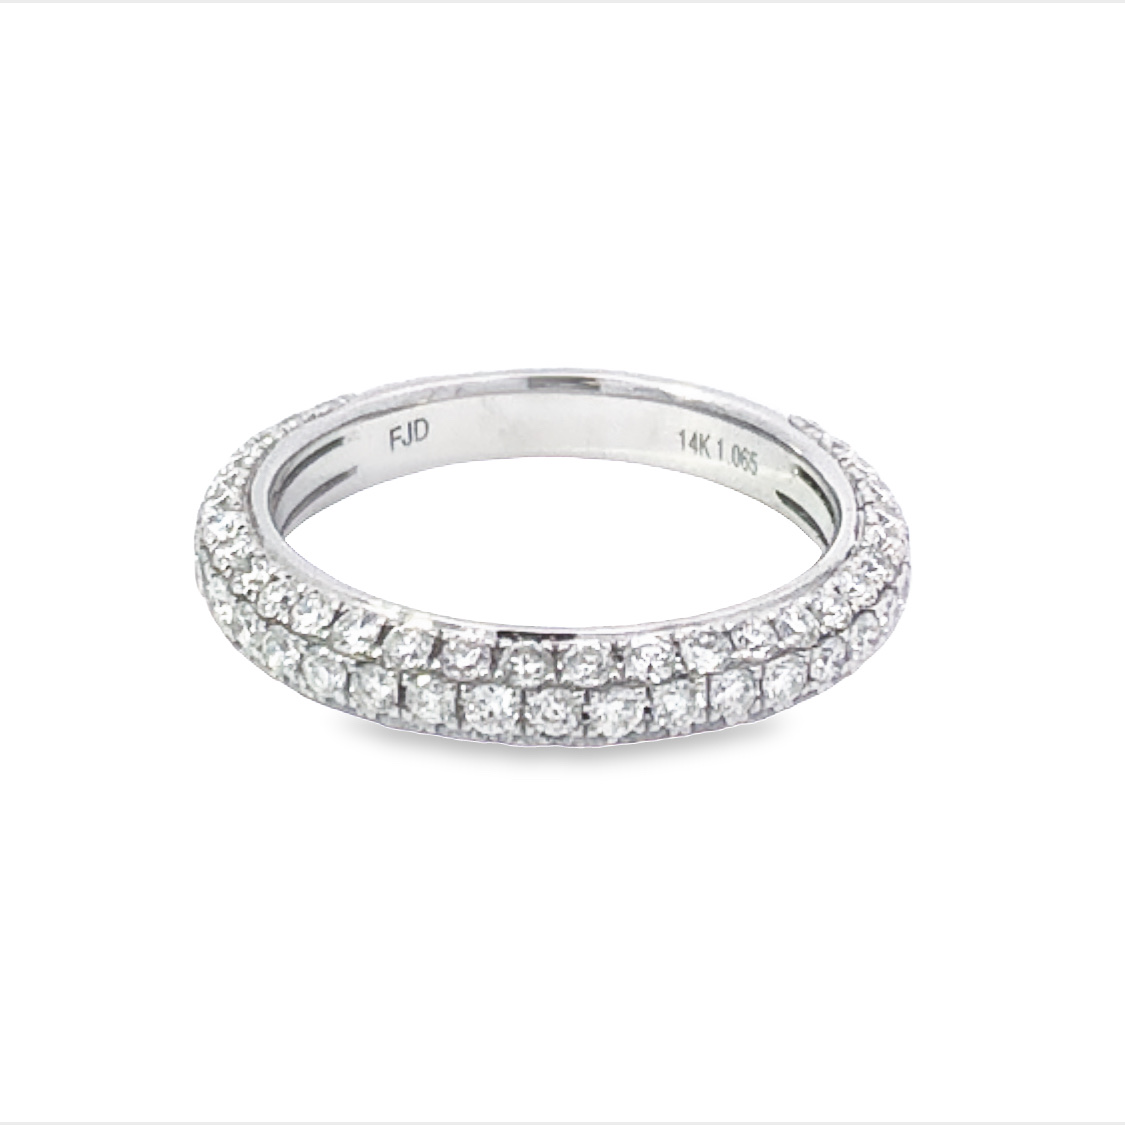 14K White Gold 3/4 Anniversary Band with 88 Round Diamonds 1.06 Tcw G-H SI  Size 6